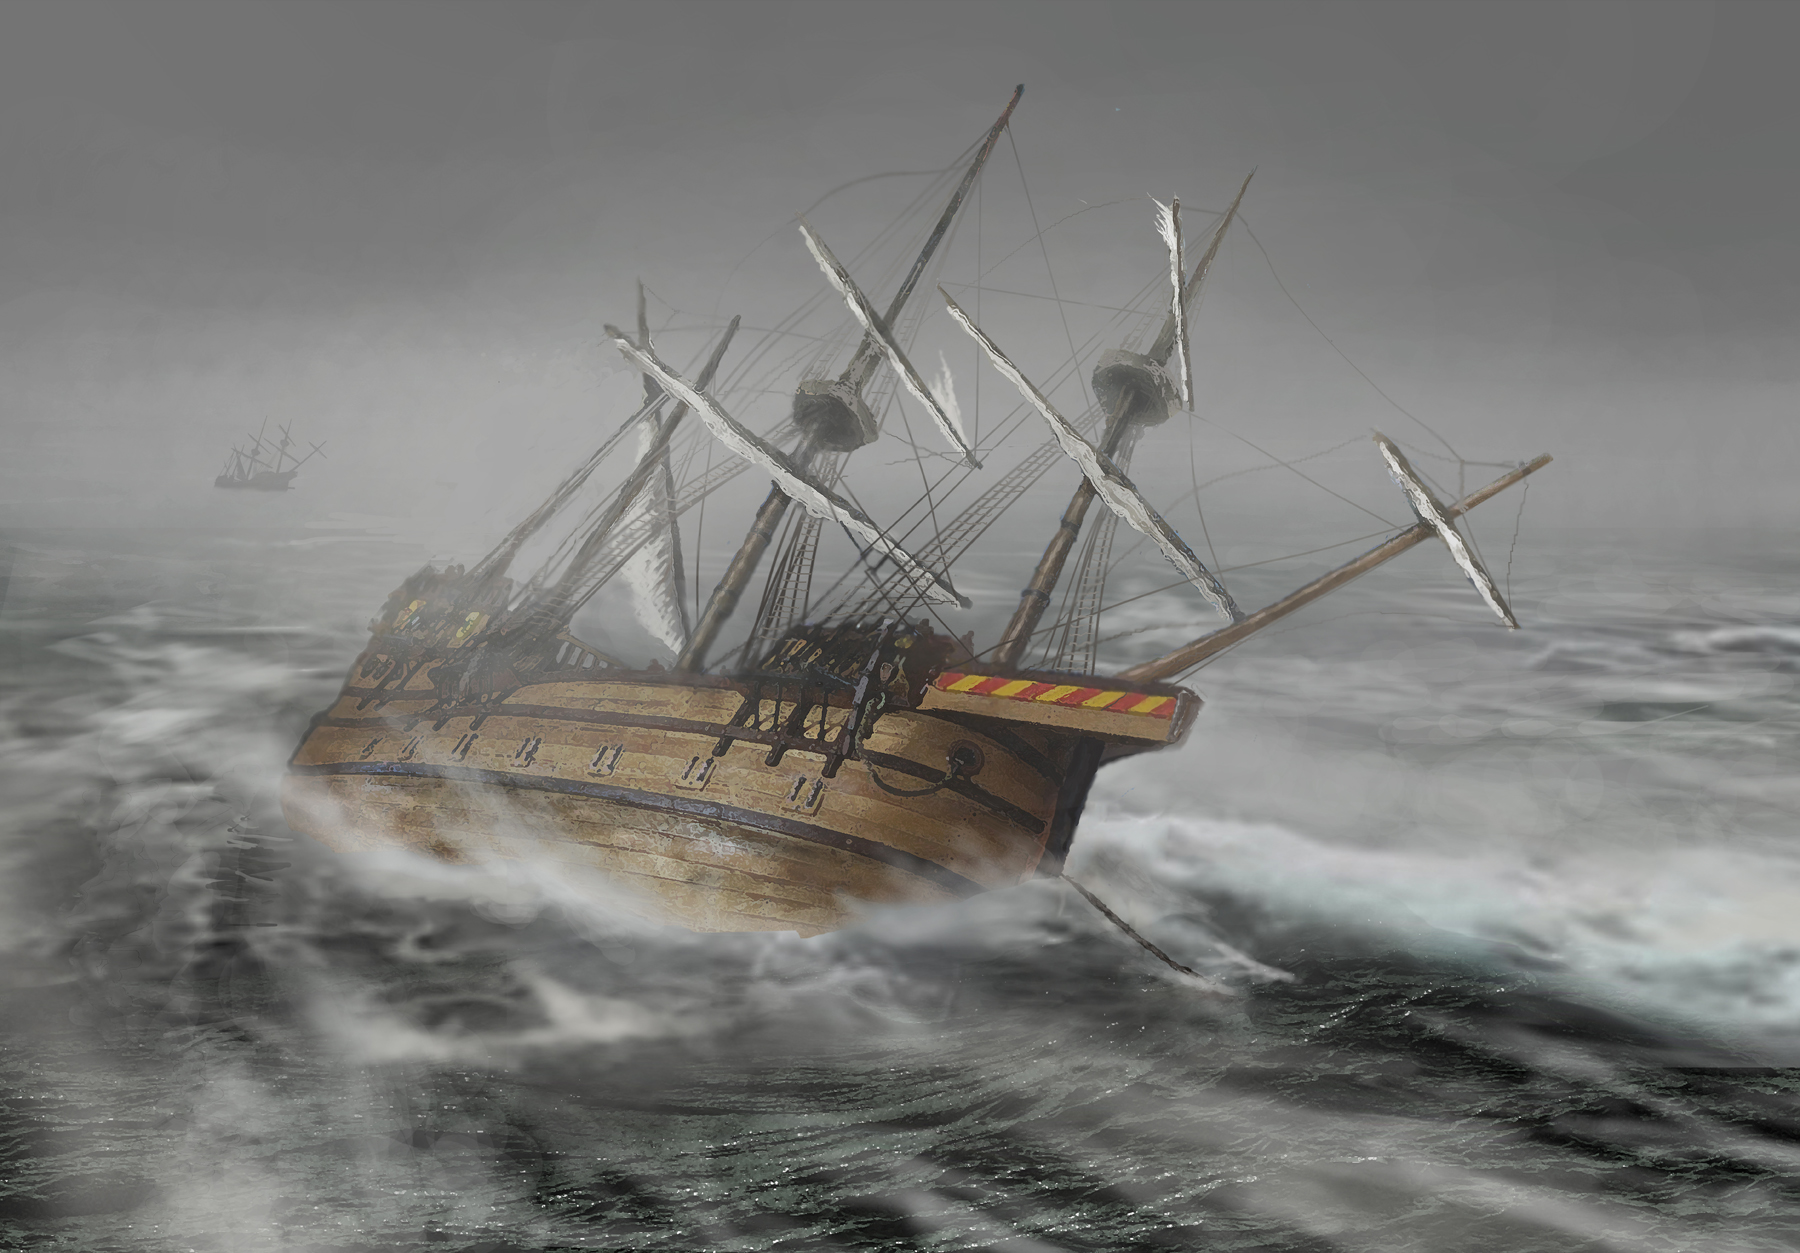 A digital painting of one of the ships in the 1554 Spanish Plate Fleet amid stormy seas